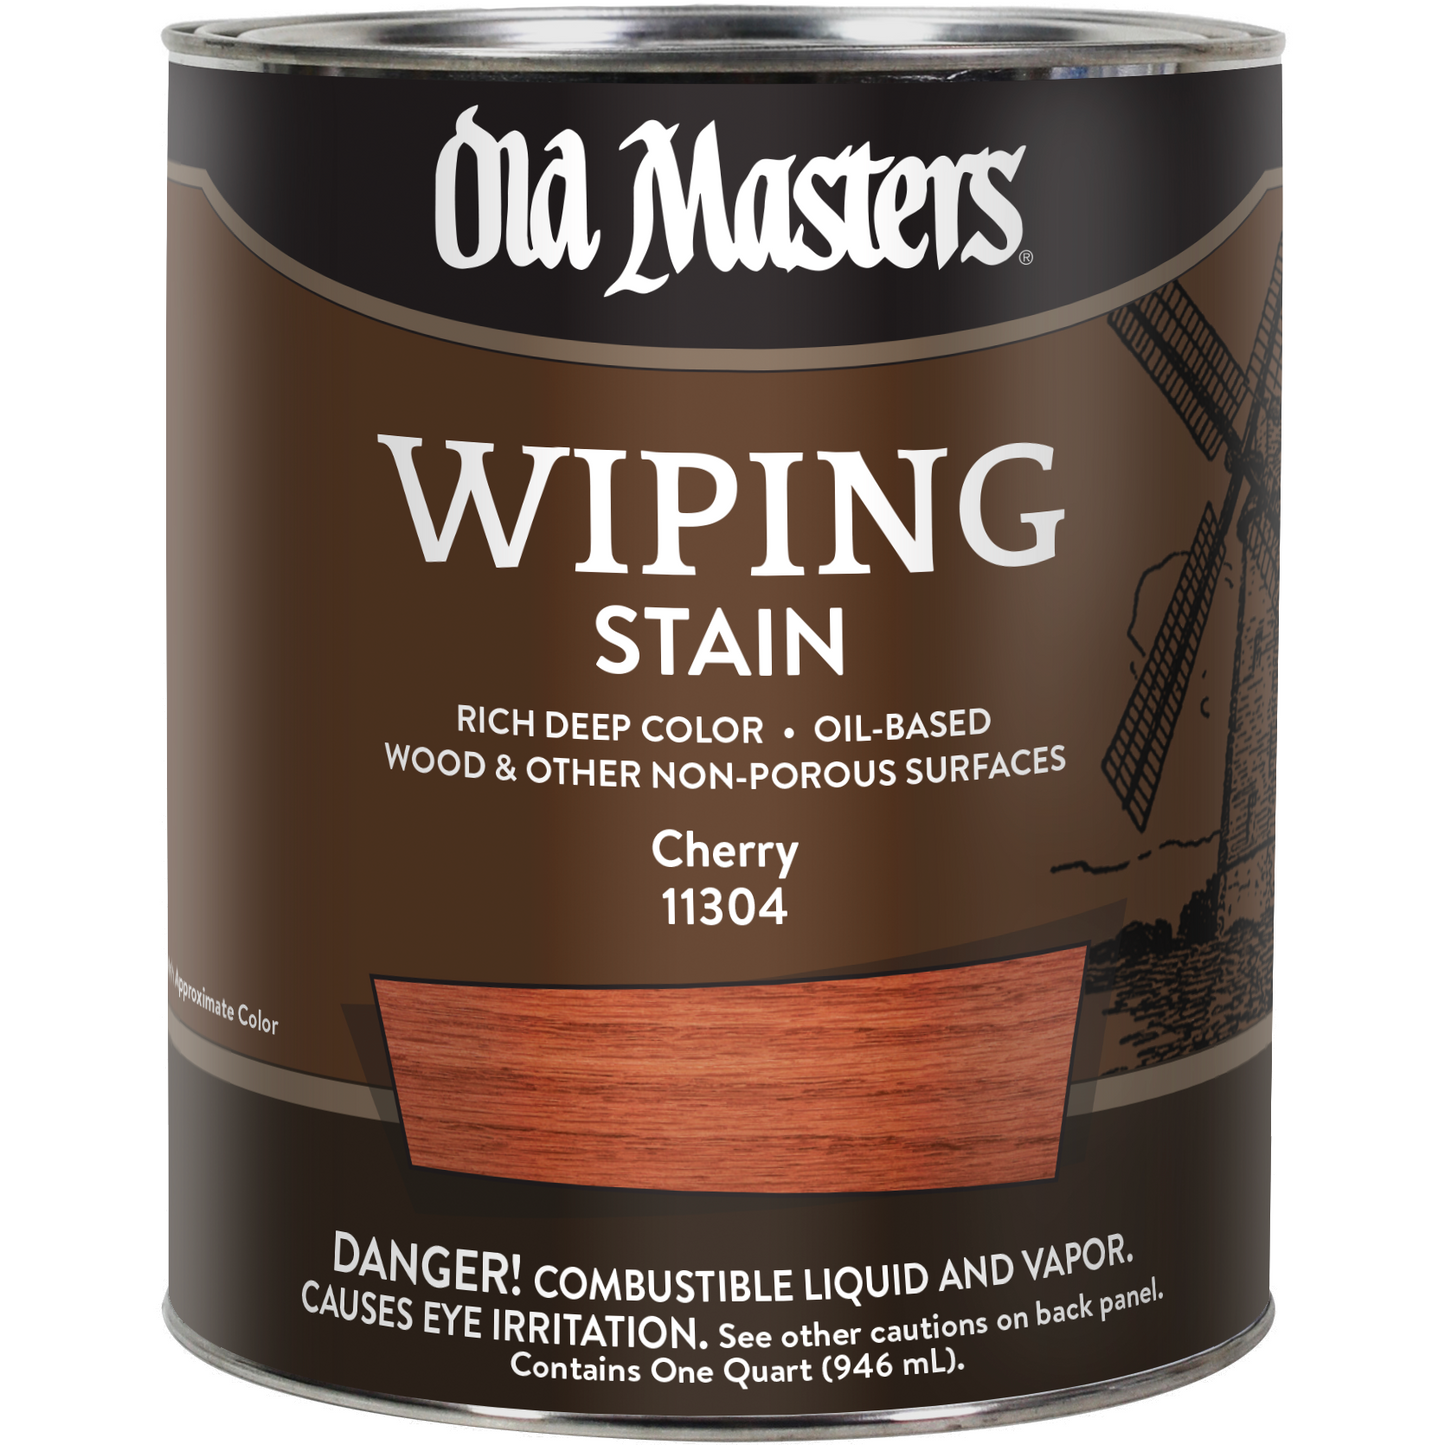 Old Masters Wiping Stain - Cherry